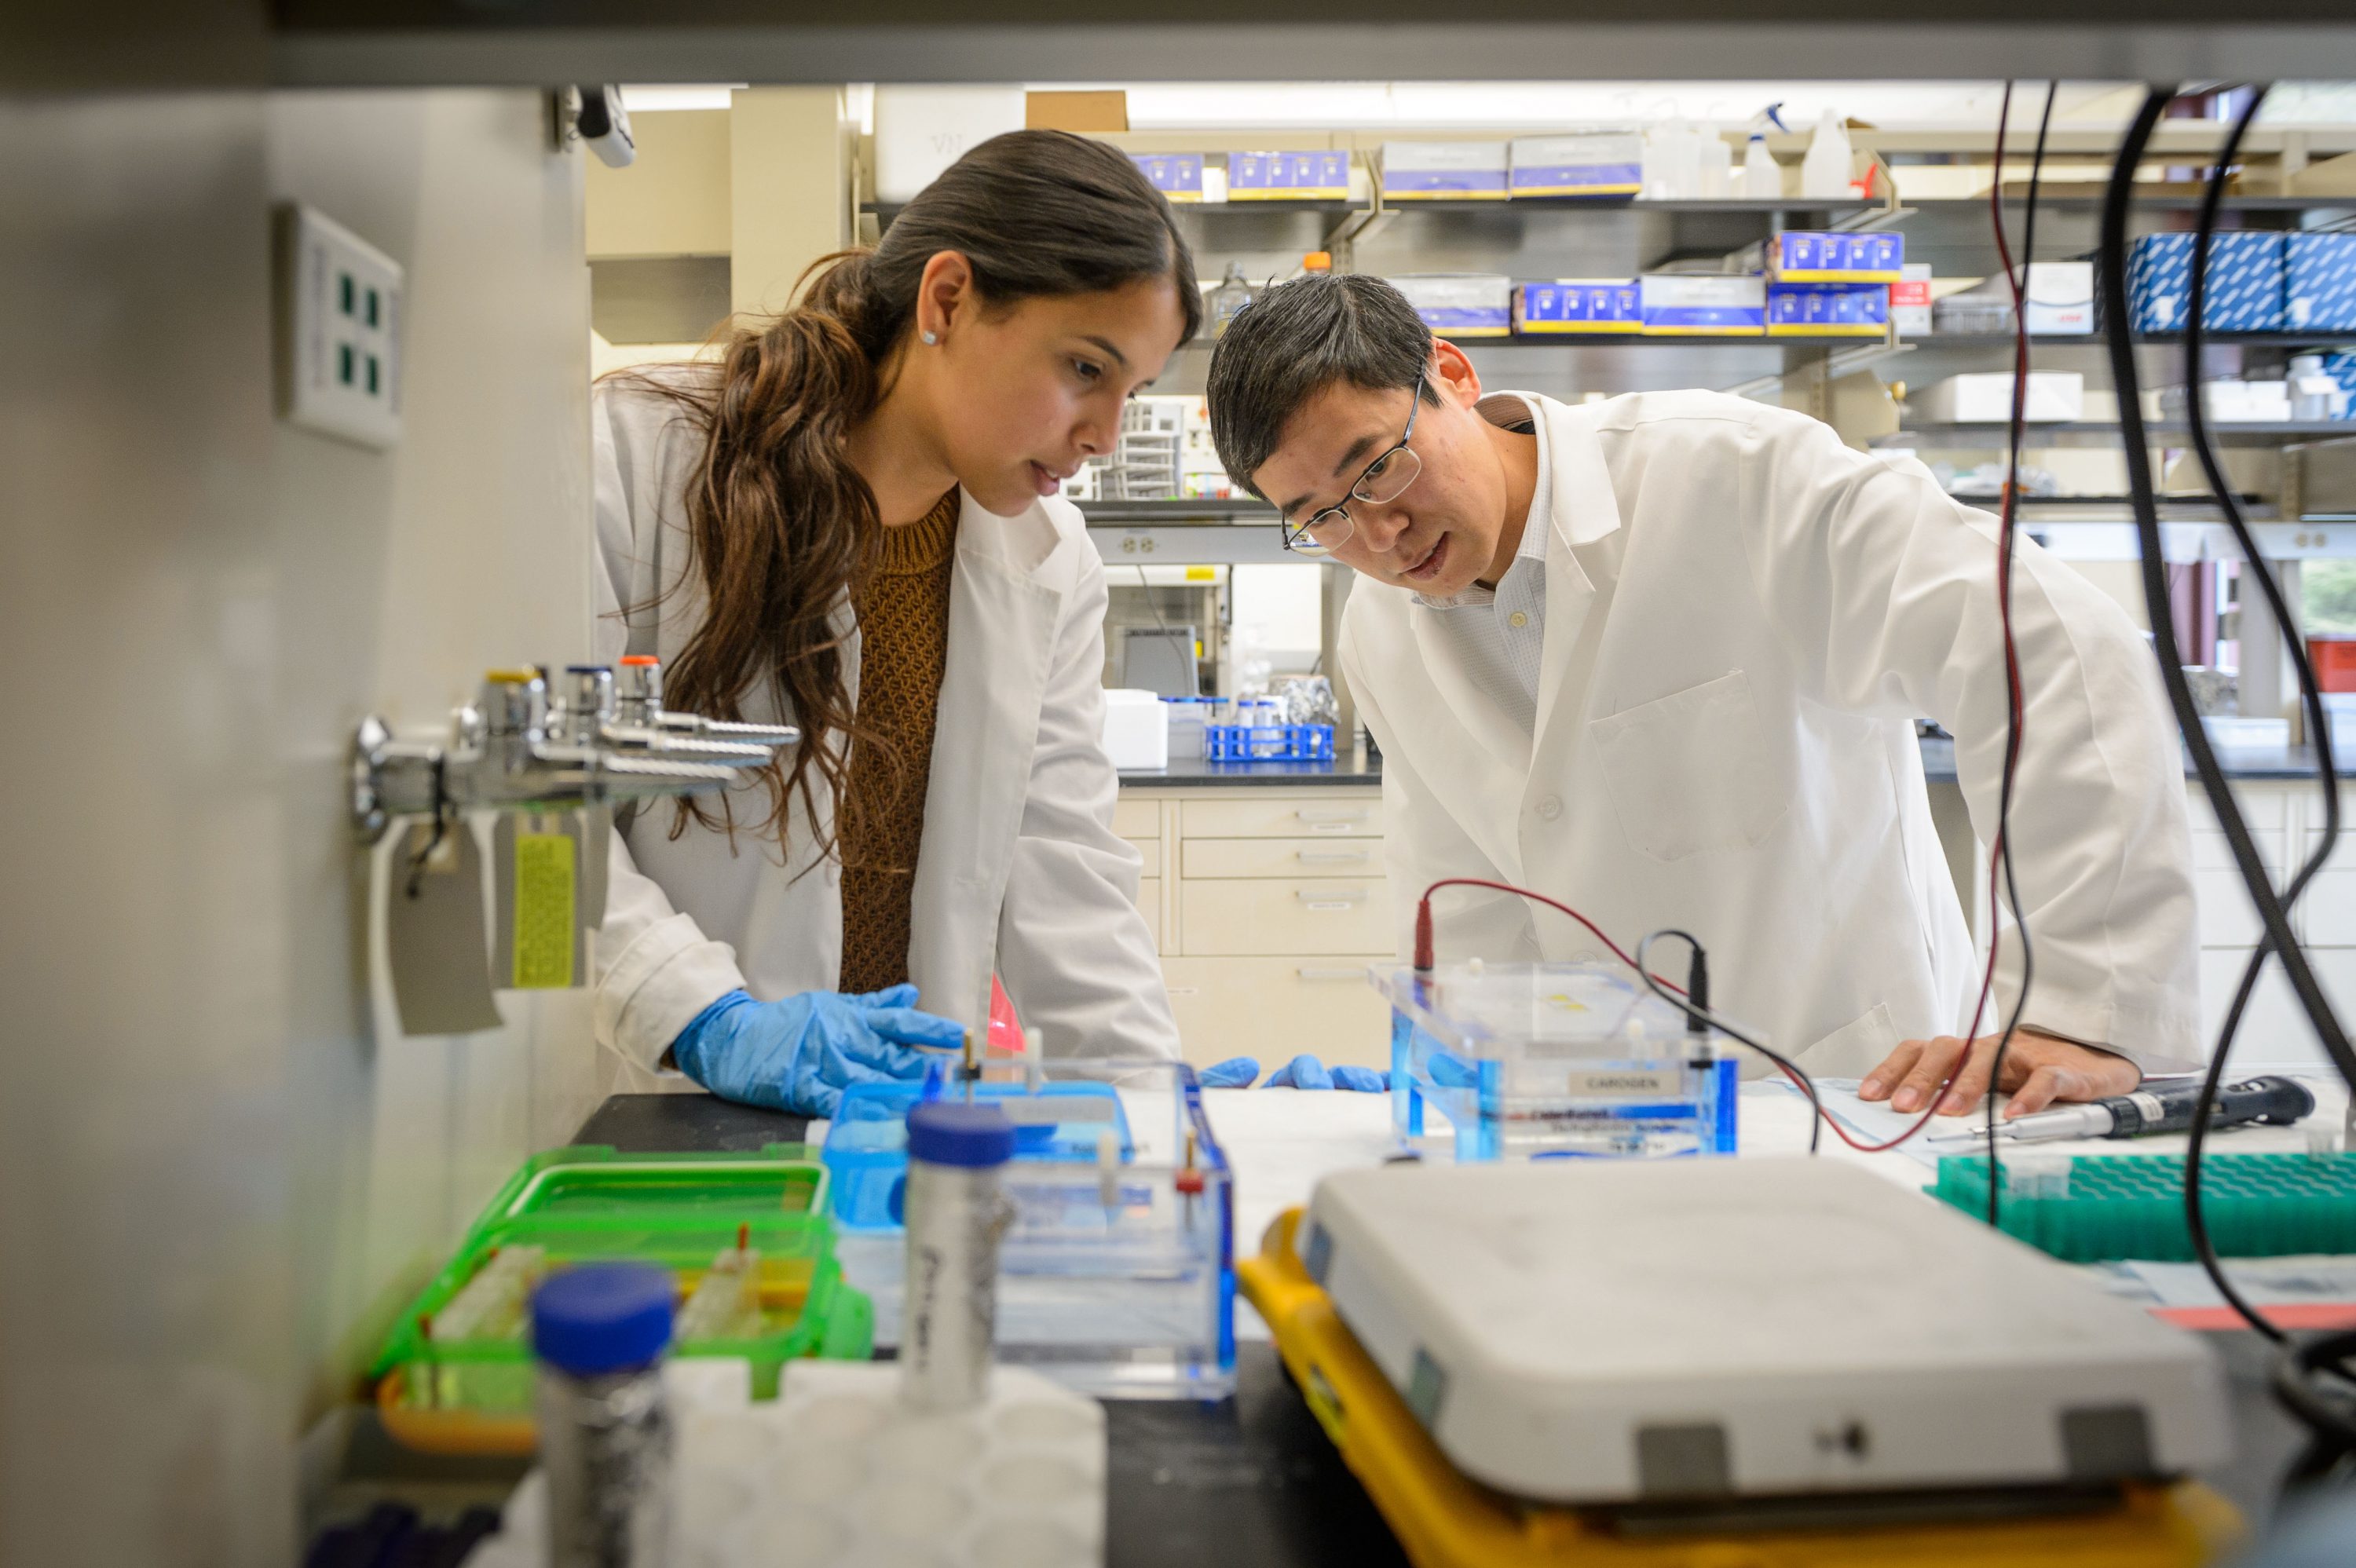 Kepeng Wang, assistant professor of immunology, right, with Kasandra Rodriguez, a research associate at CaroGen Corp.'s technology incubation lab in Farmington on Dec. 12, 2016. (Peter Morenus/UConn Photo)